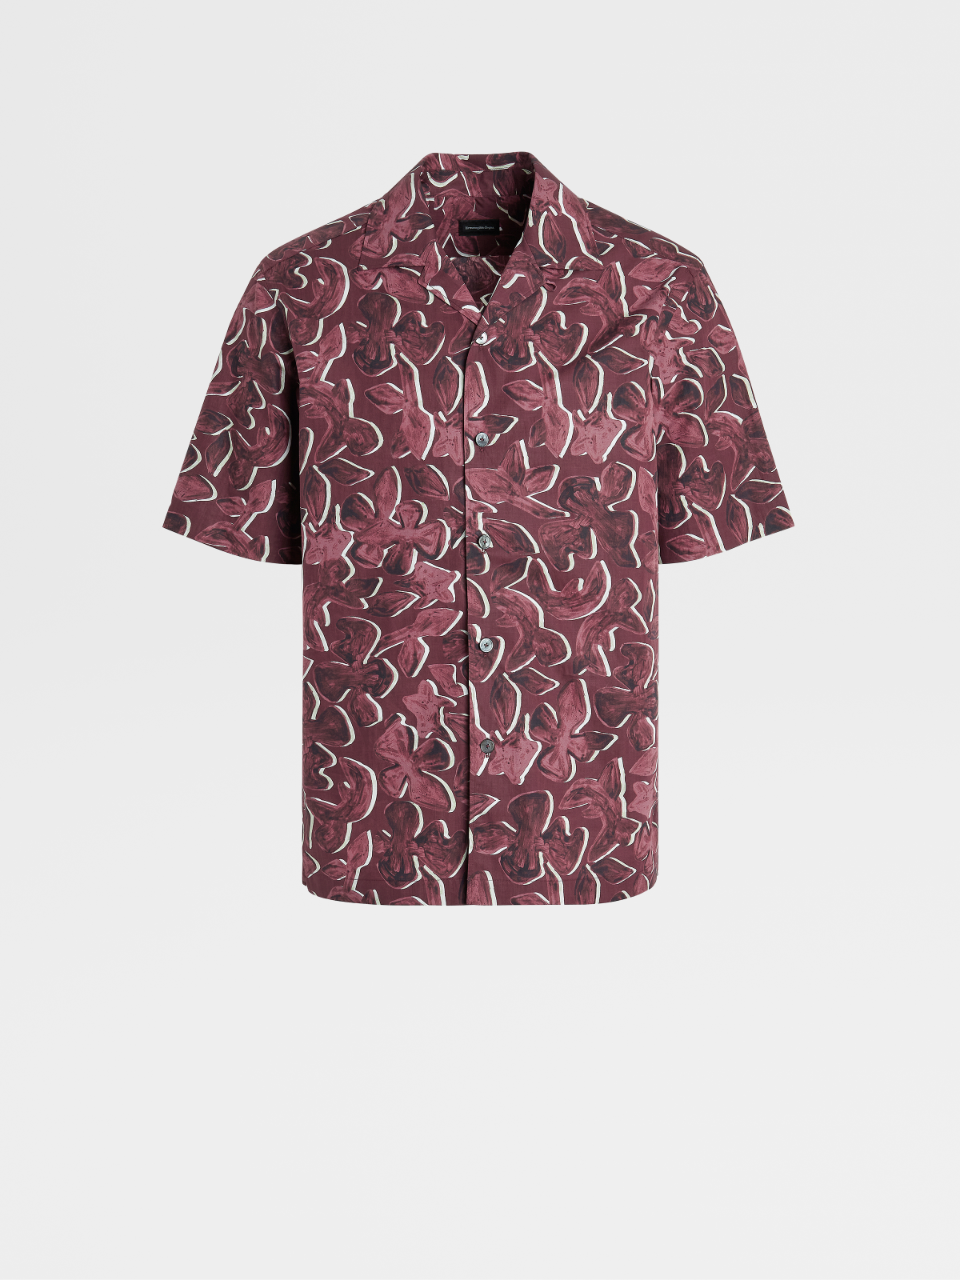 Dark Red and Off White Printed Pure Cotton Short-sleeve Shirt, Regular Fit